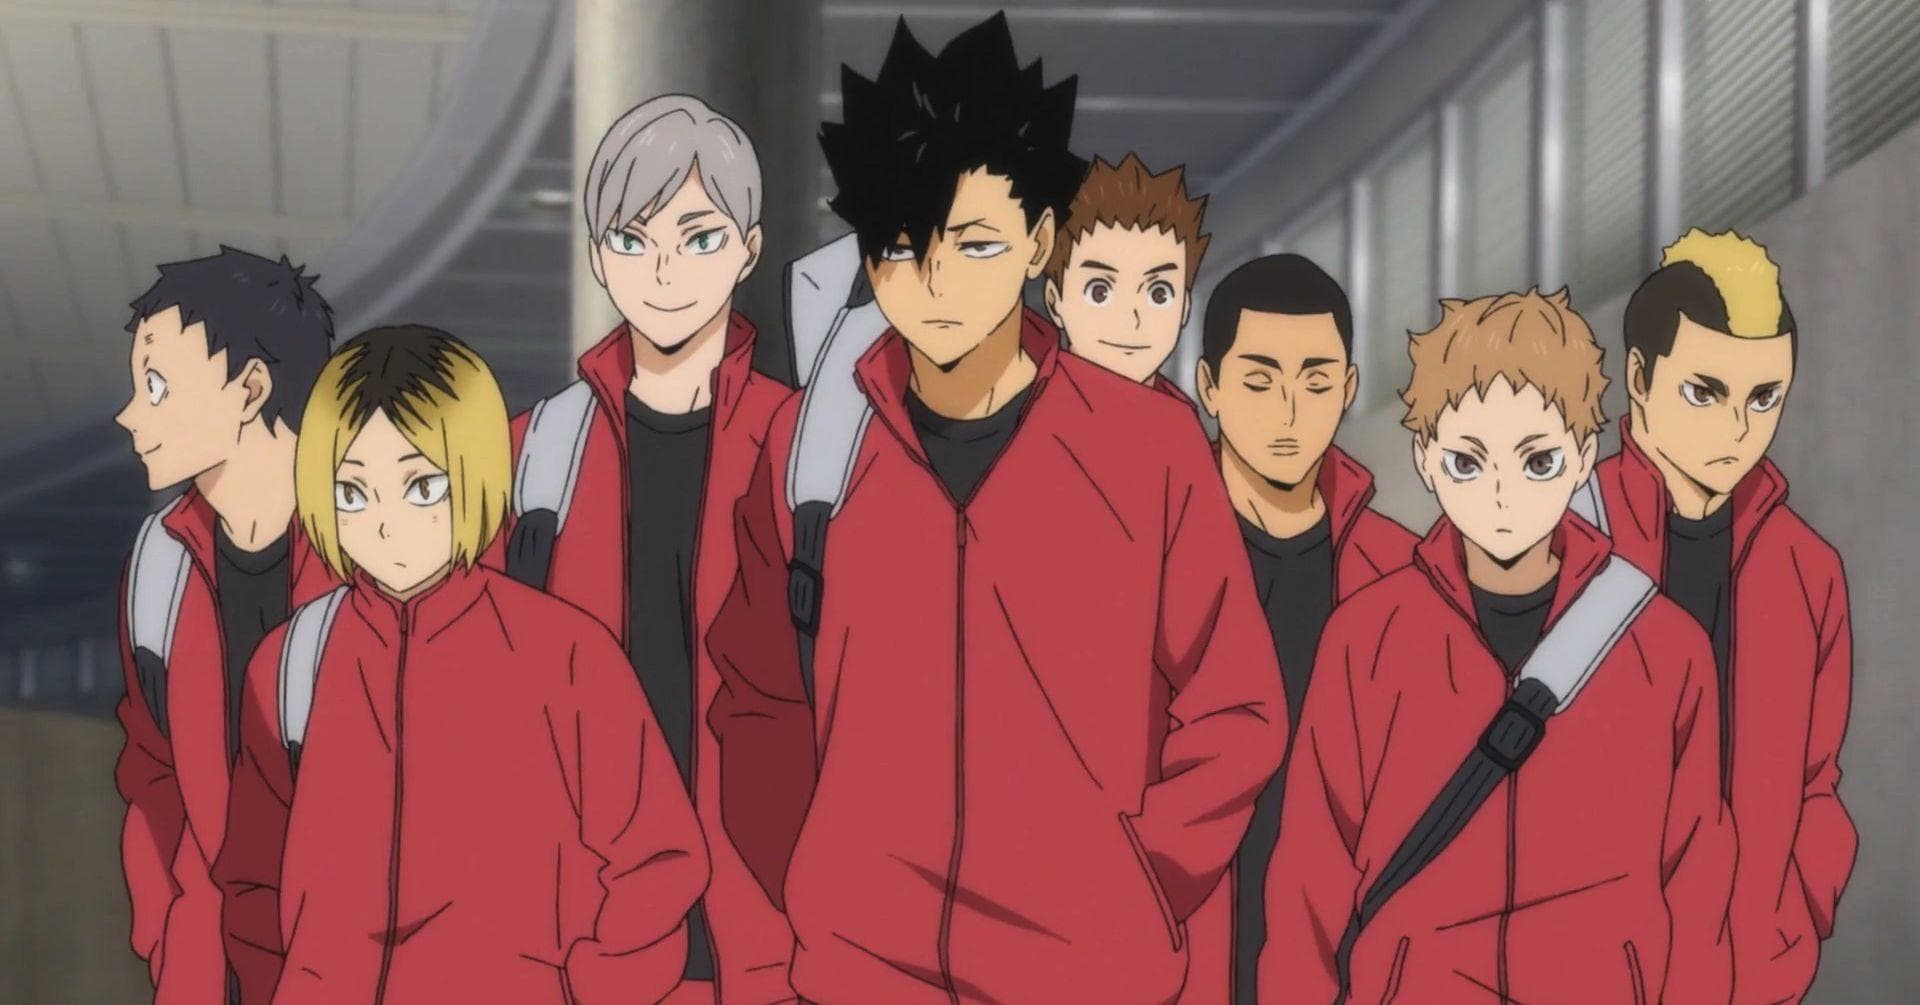 15 Things You Didn't Know About Nekoma From 'Haikyu!!'